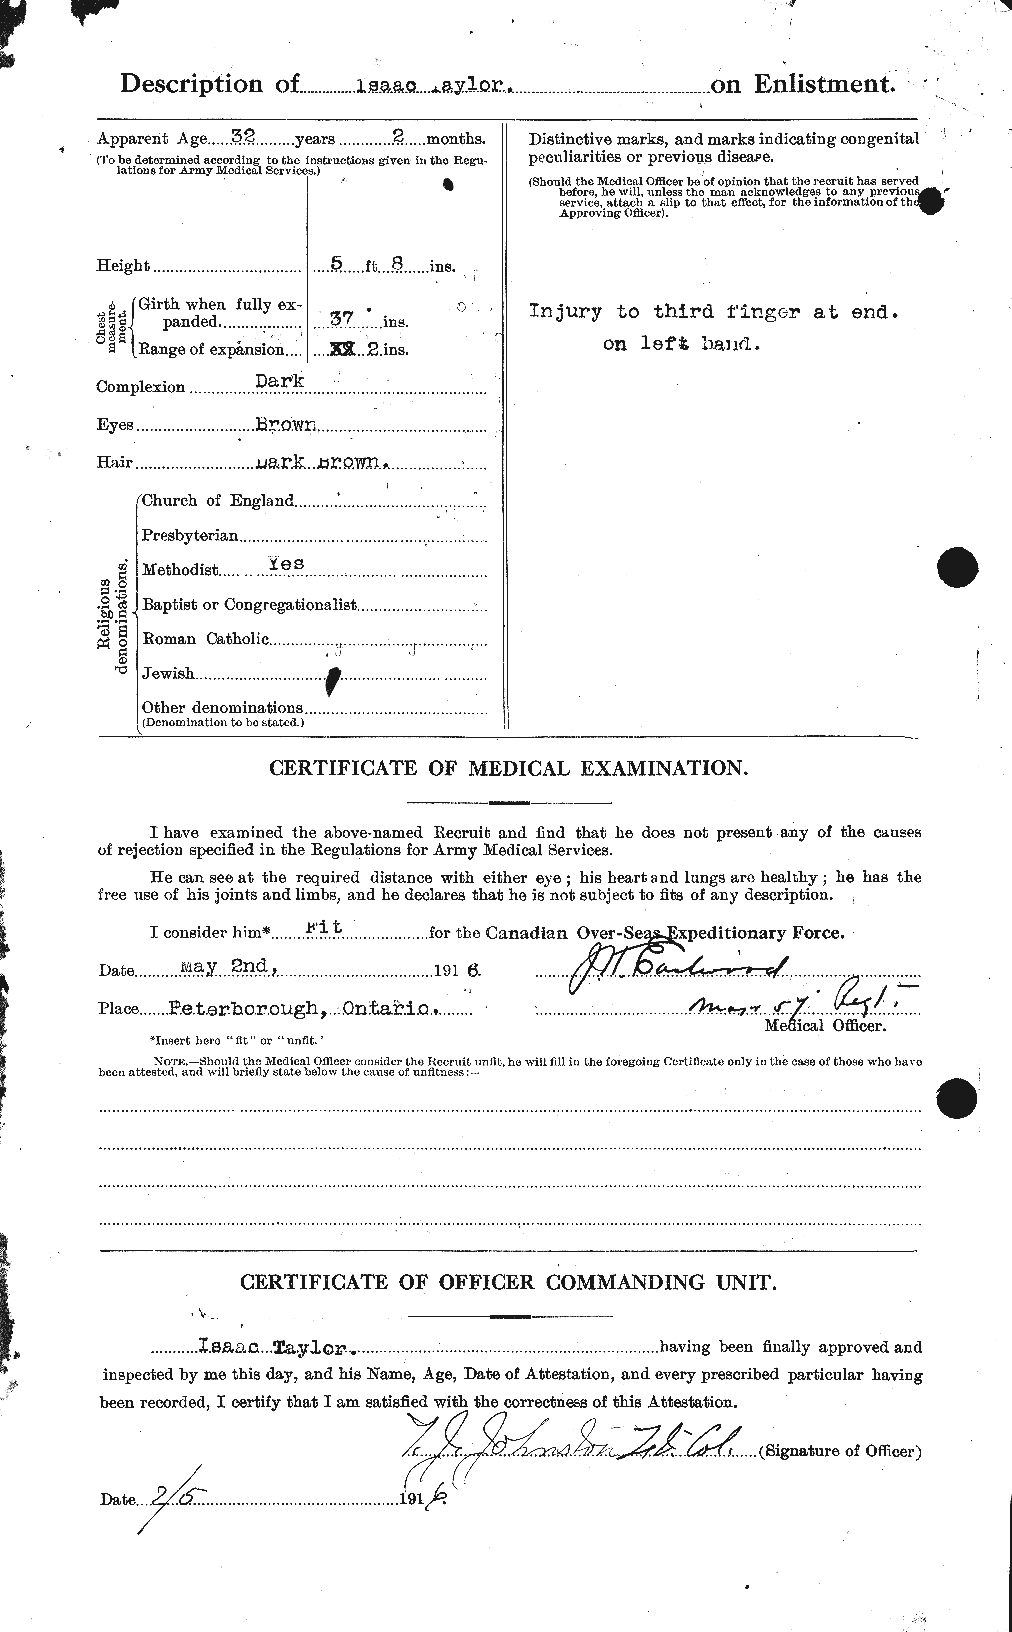 Personnel Records of the First World War - CEF 626630b